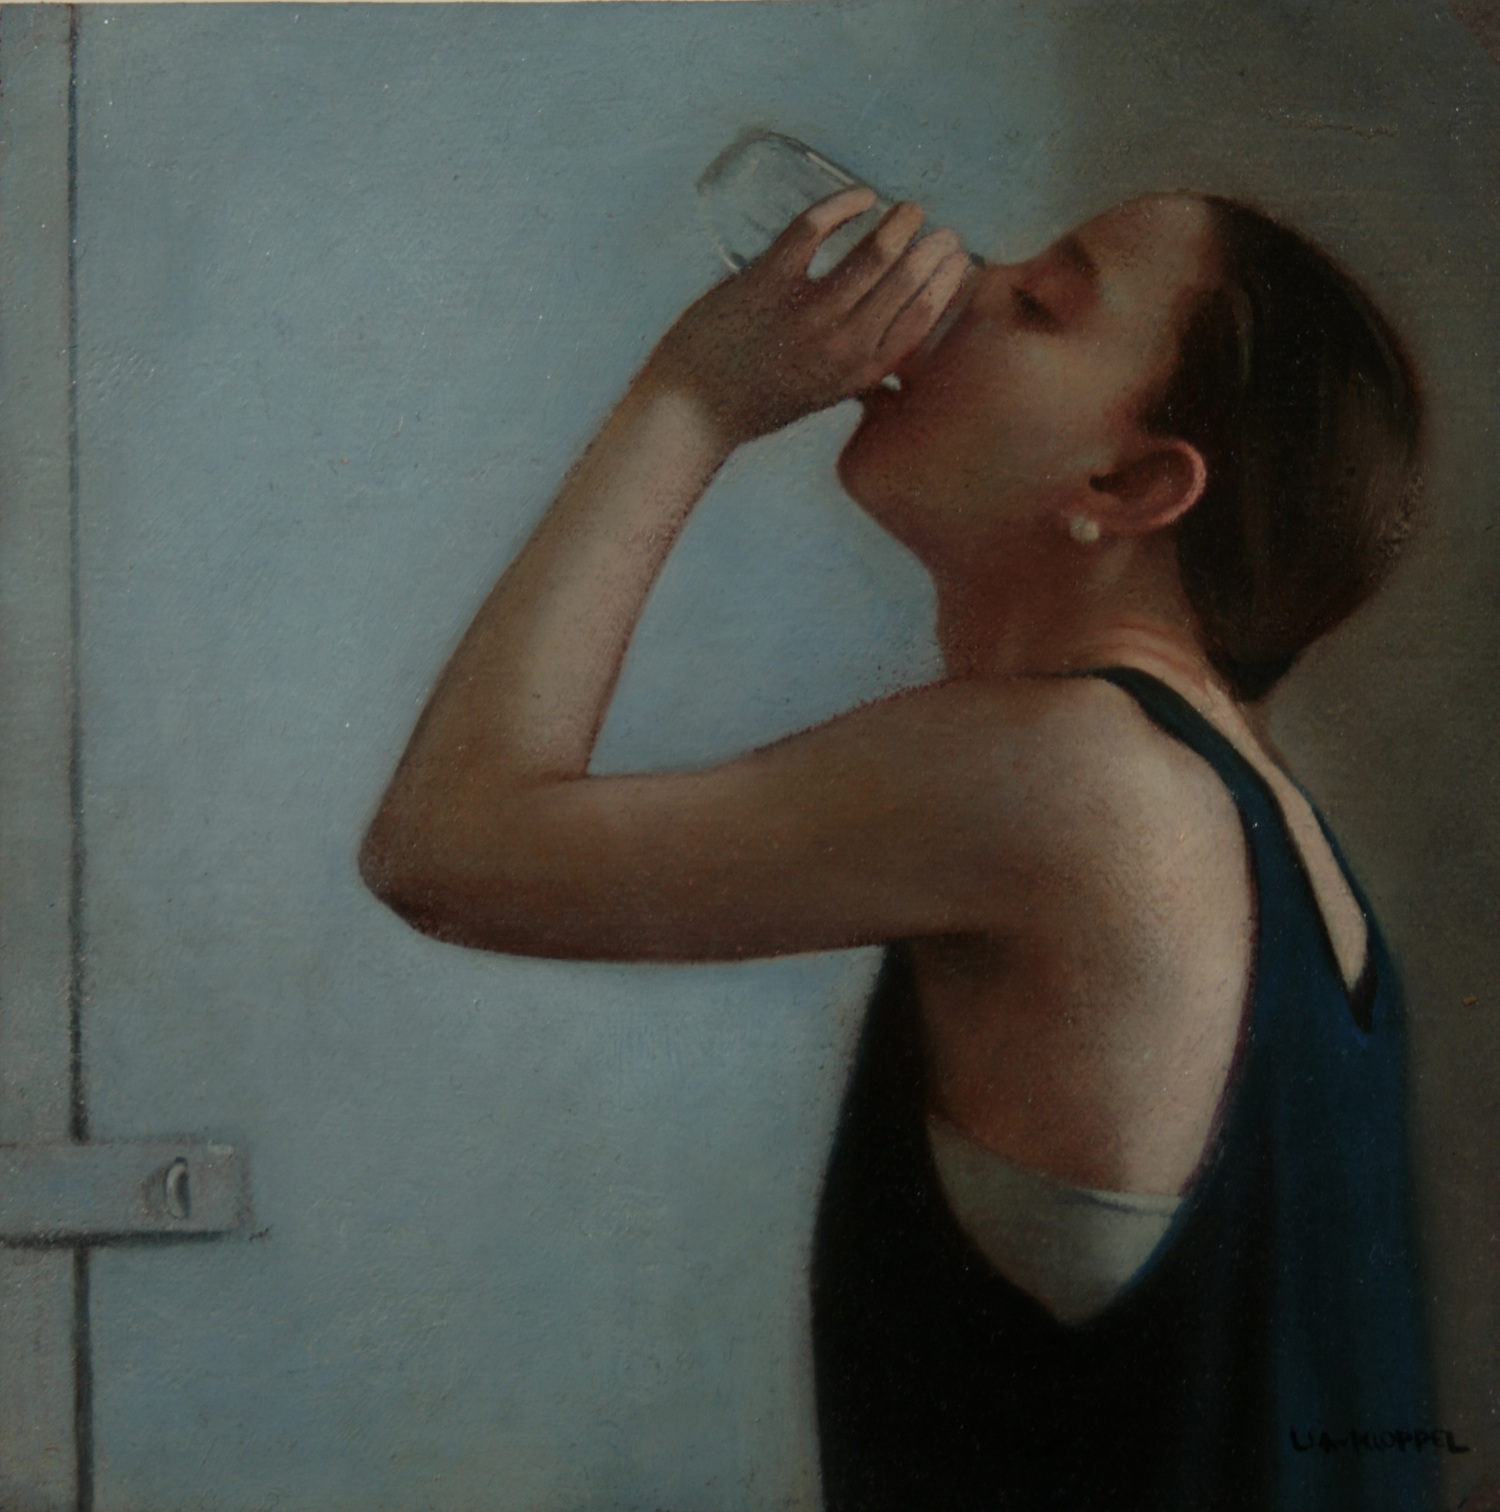   Drink,&nbsp; 2007, Oil on linen, 9 x 9 inches, Private collection 